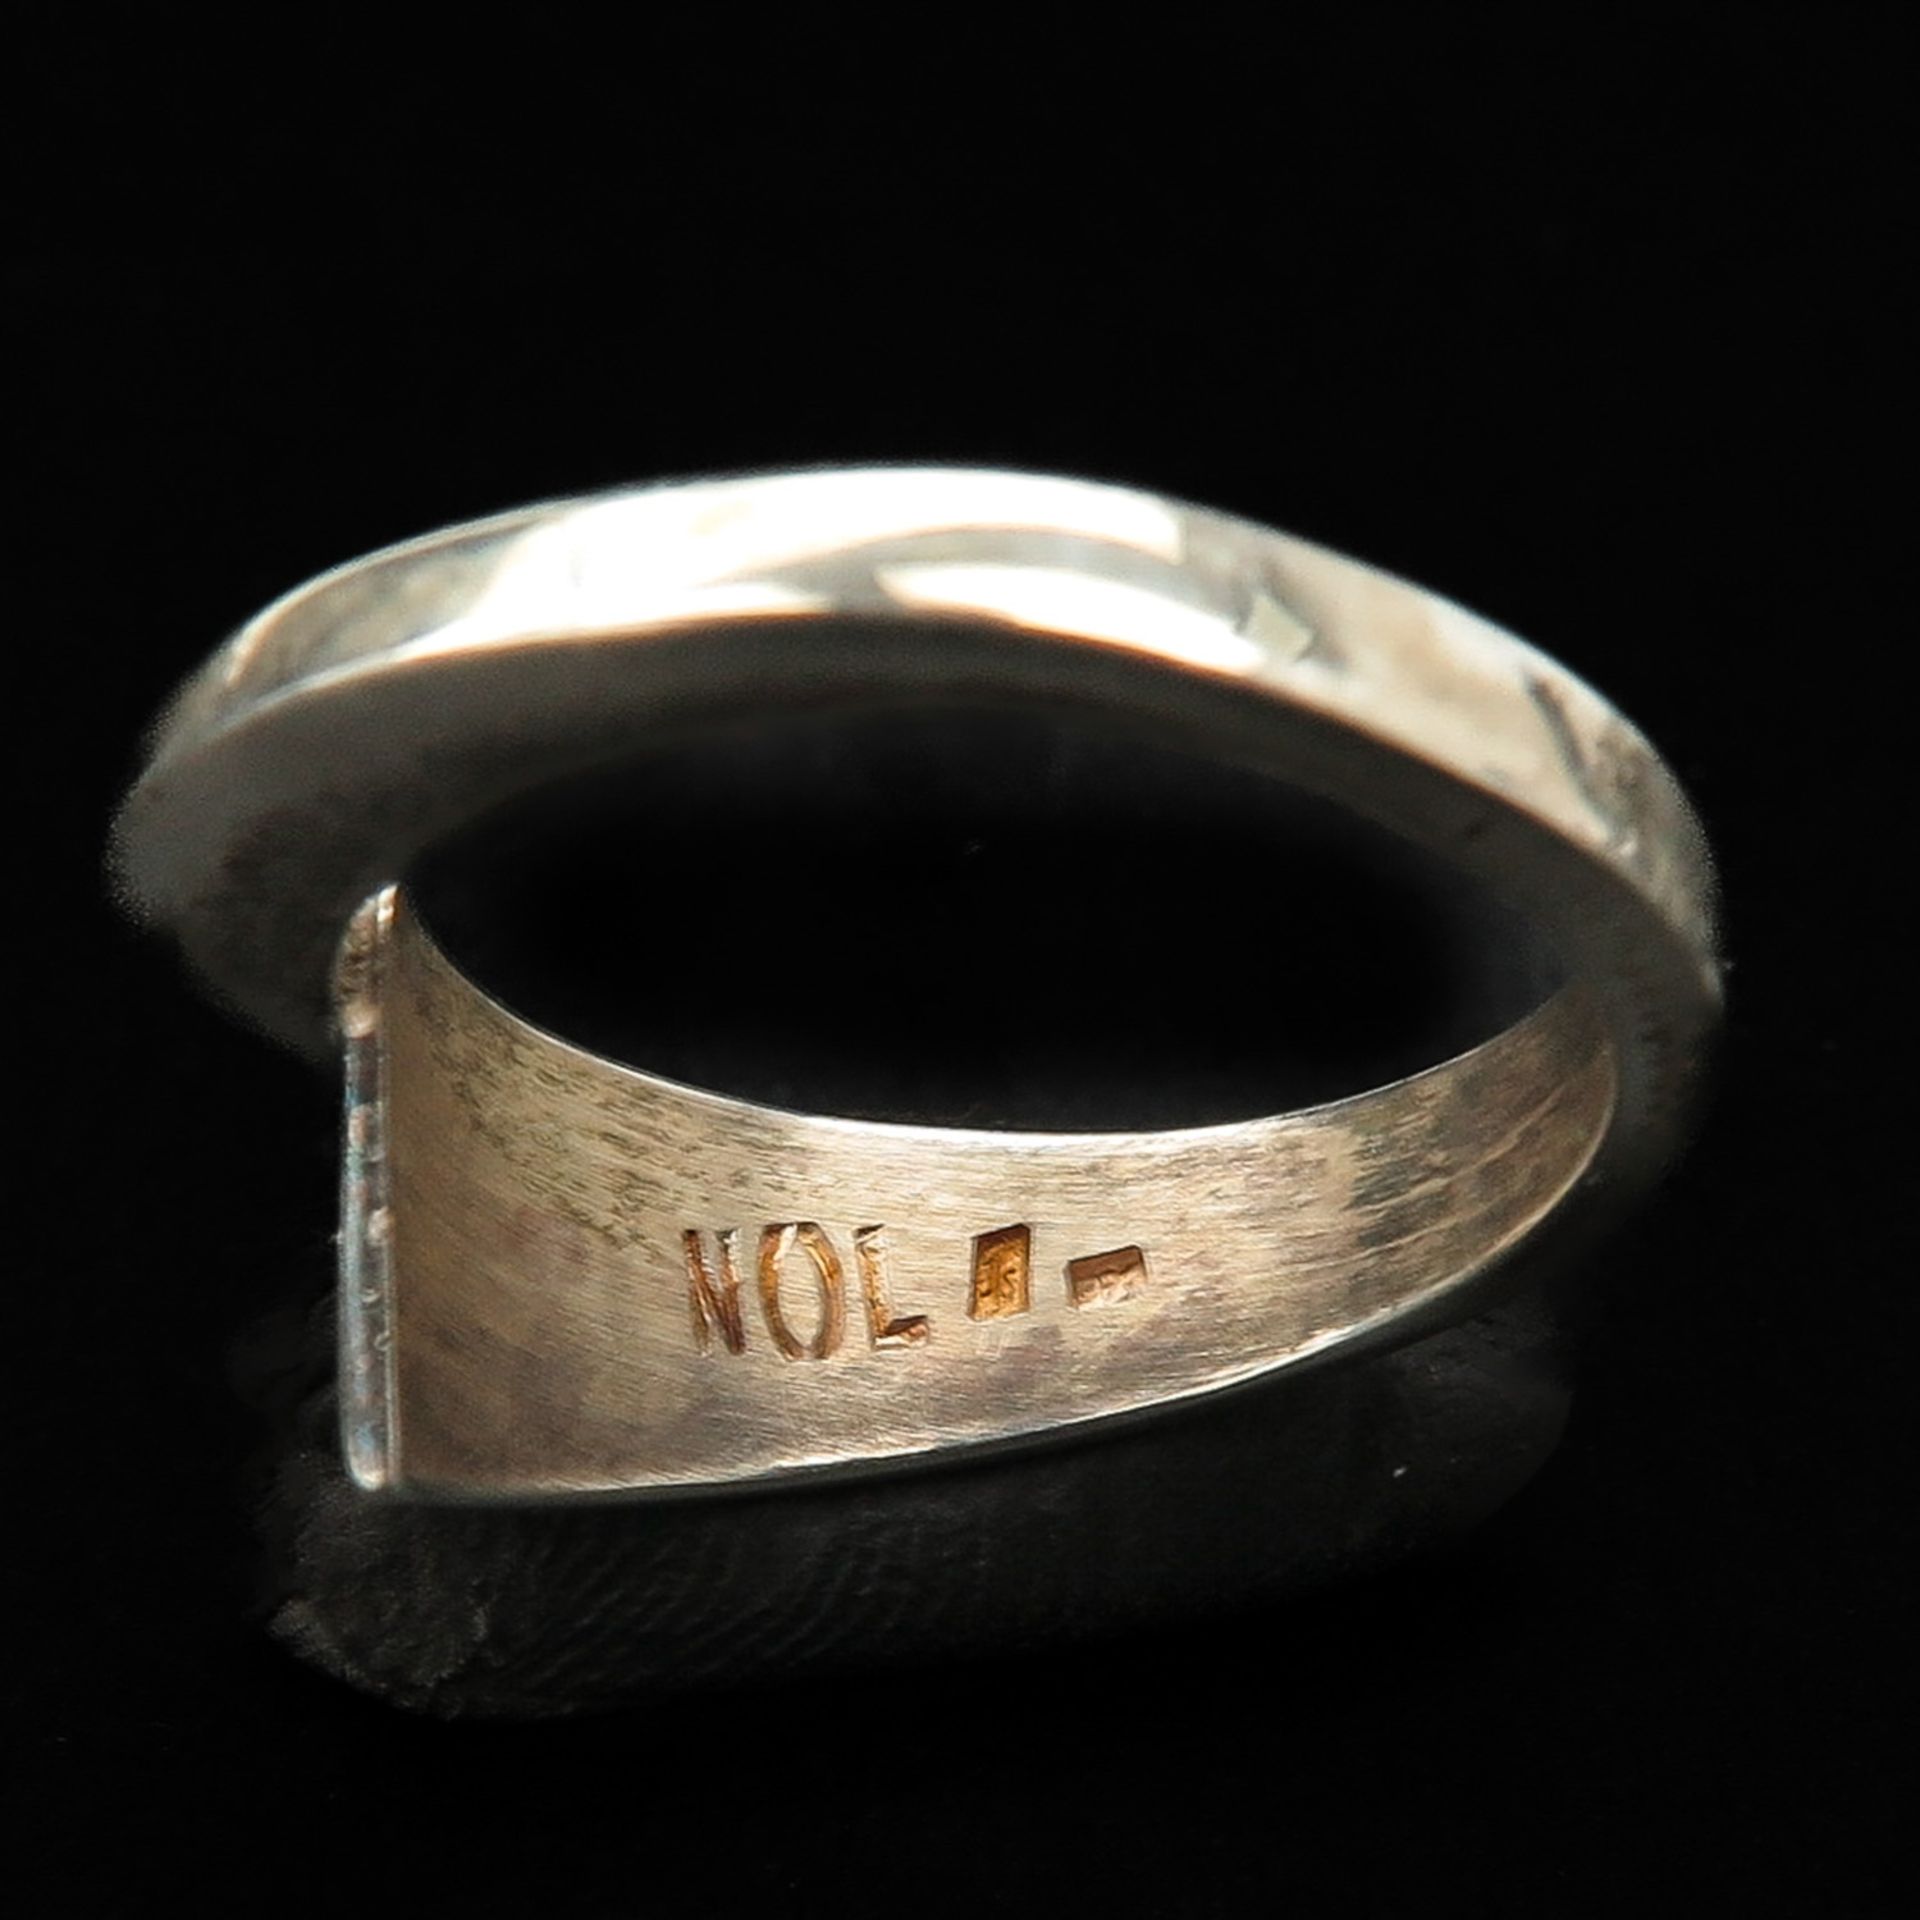 A Collection of Silver Nol Jewelry - Image 6 of 7